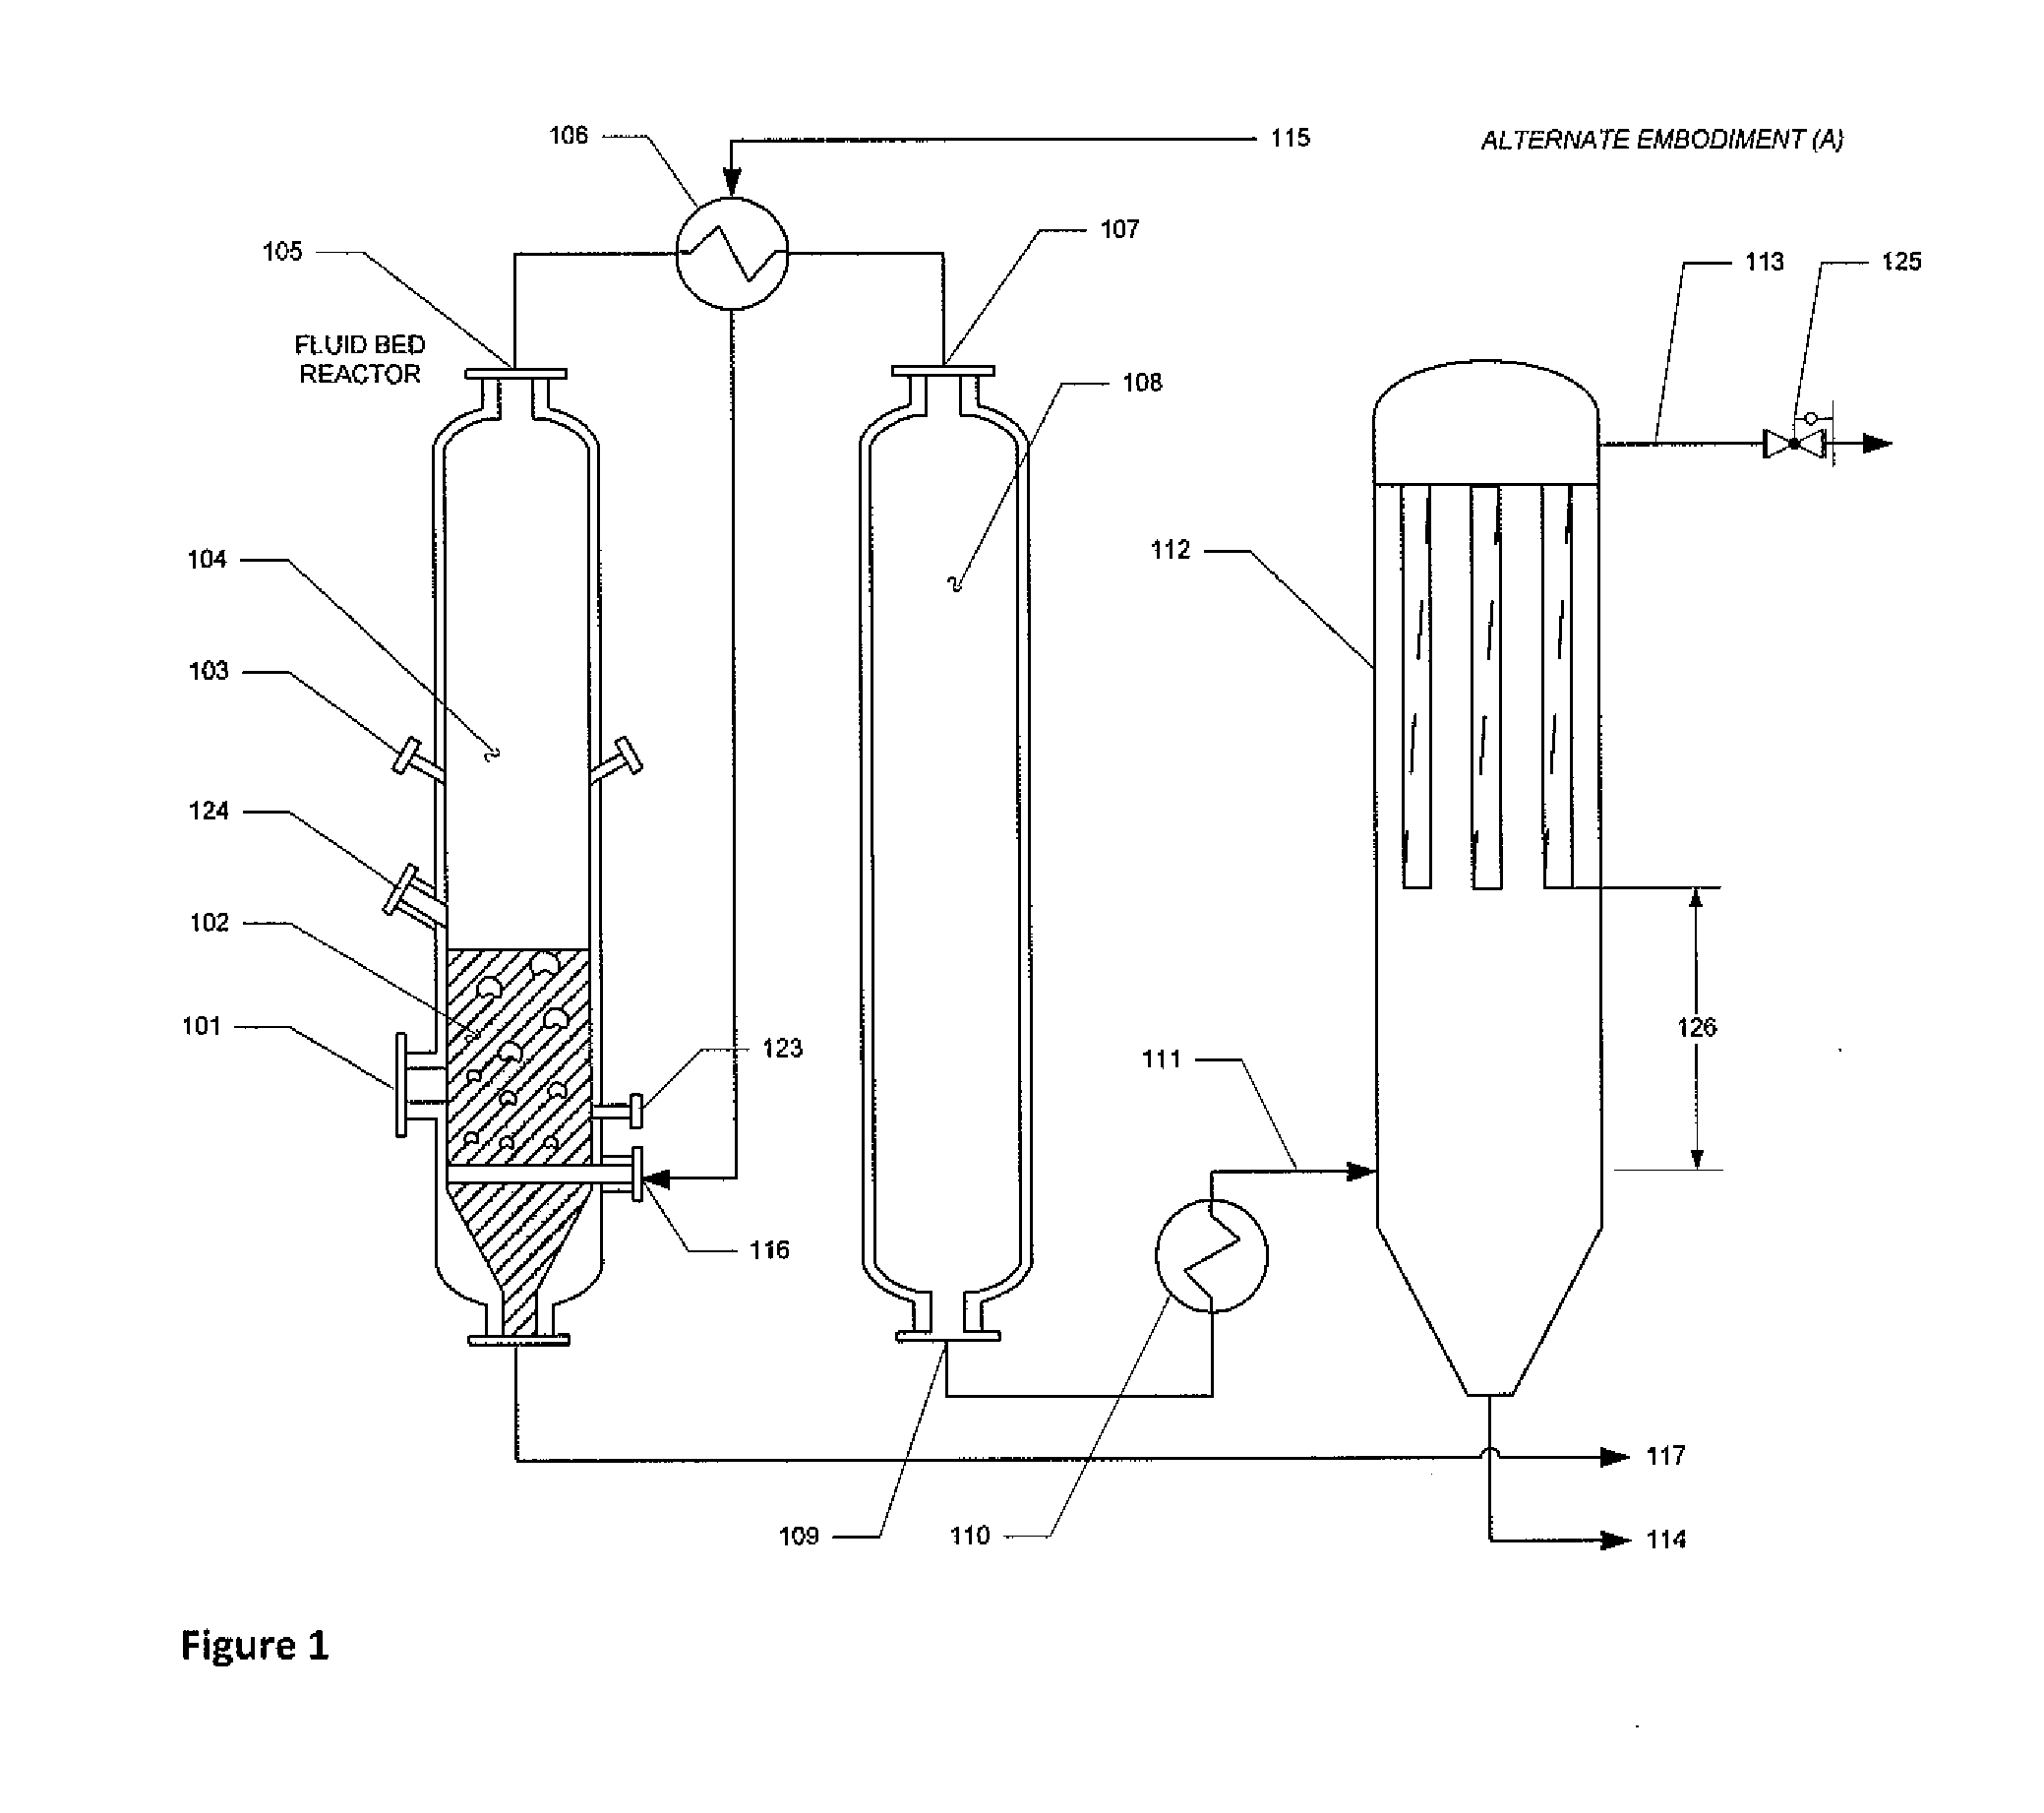 Apparatus and Method for Optimized Acid Gas and Toxic Metal Control in Gasifier Produced Gases